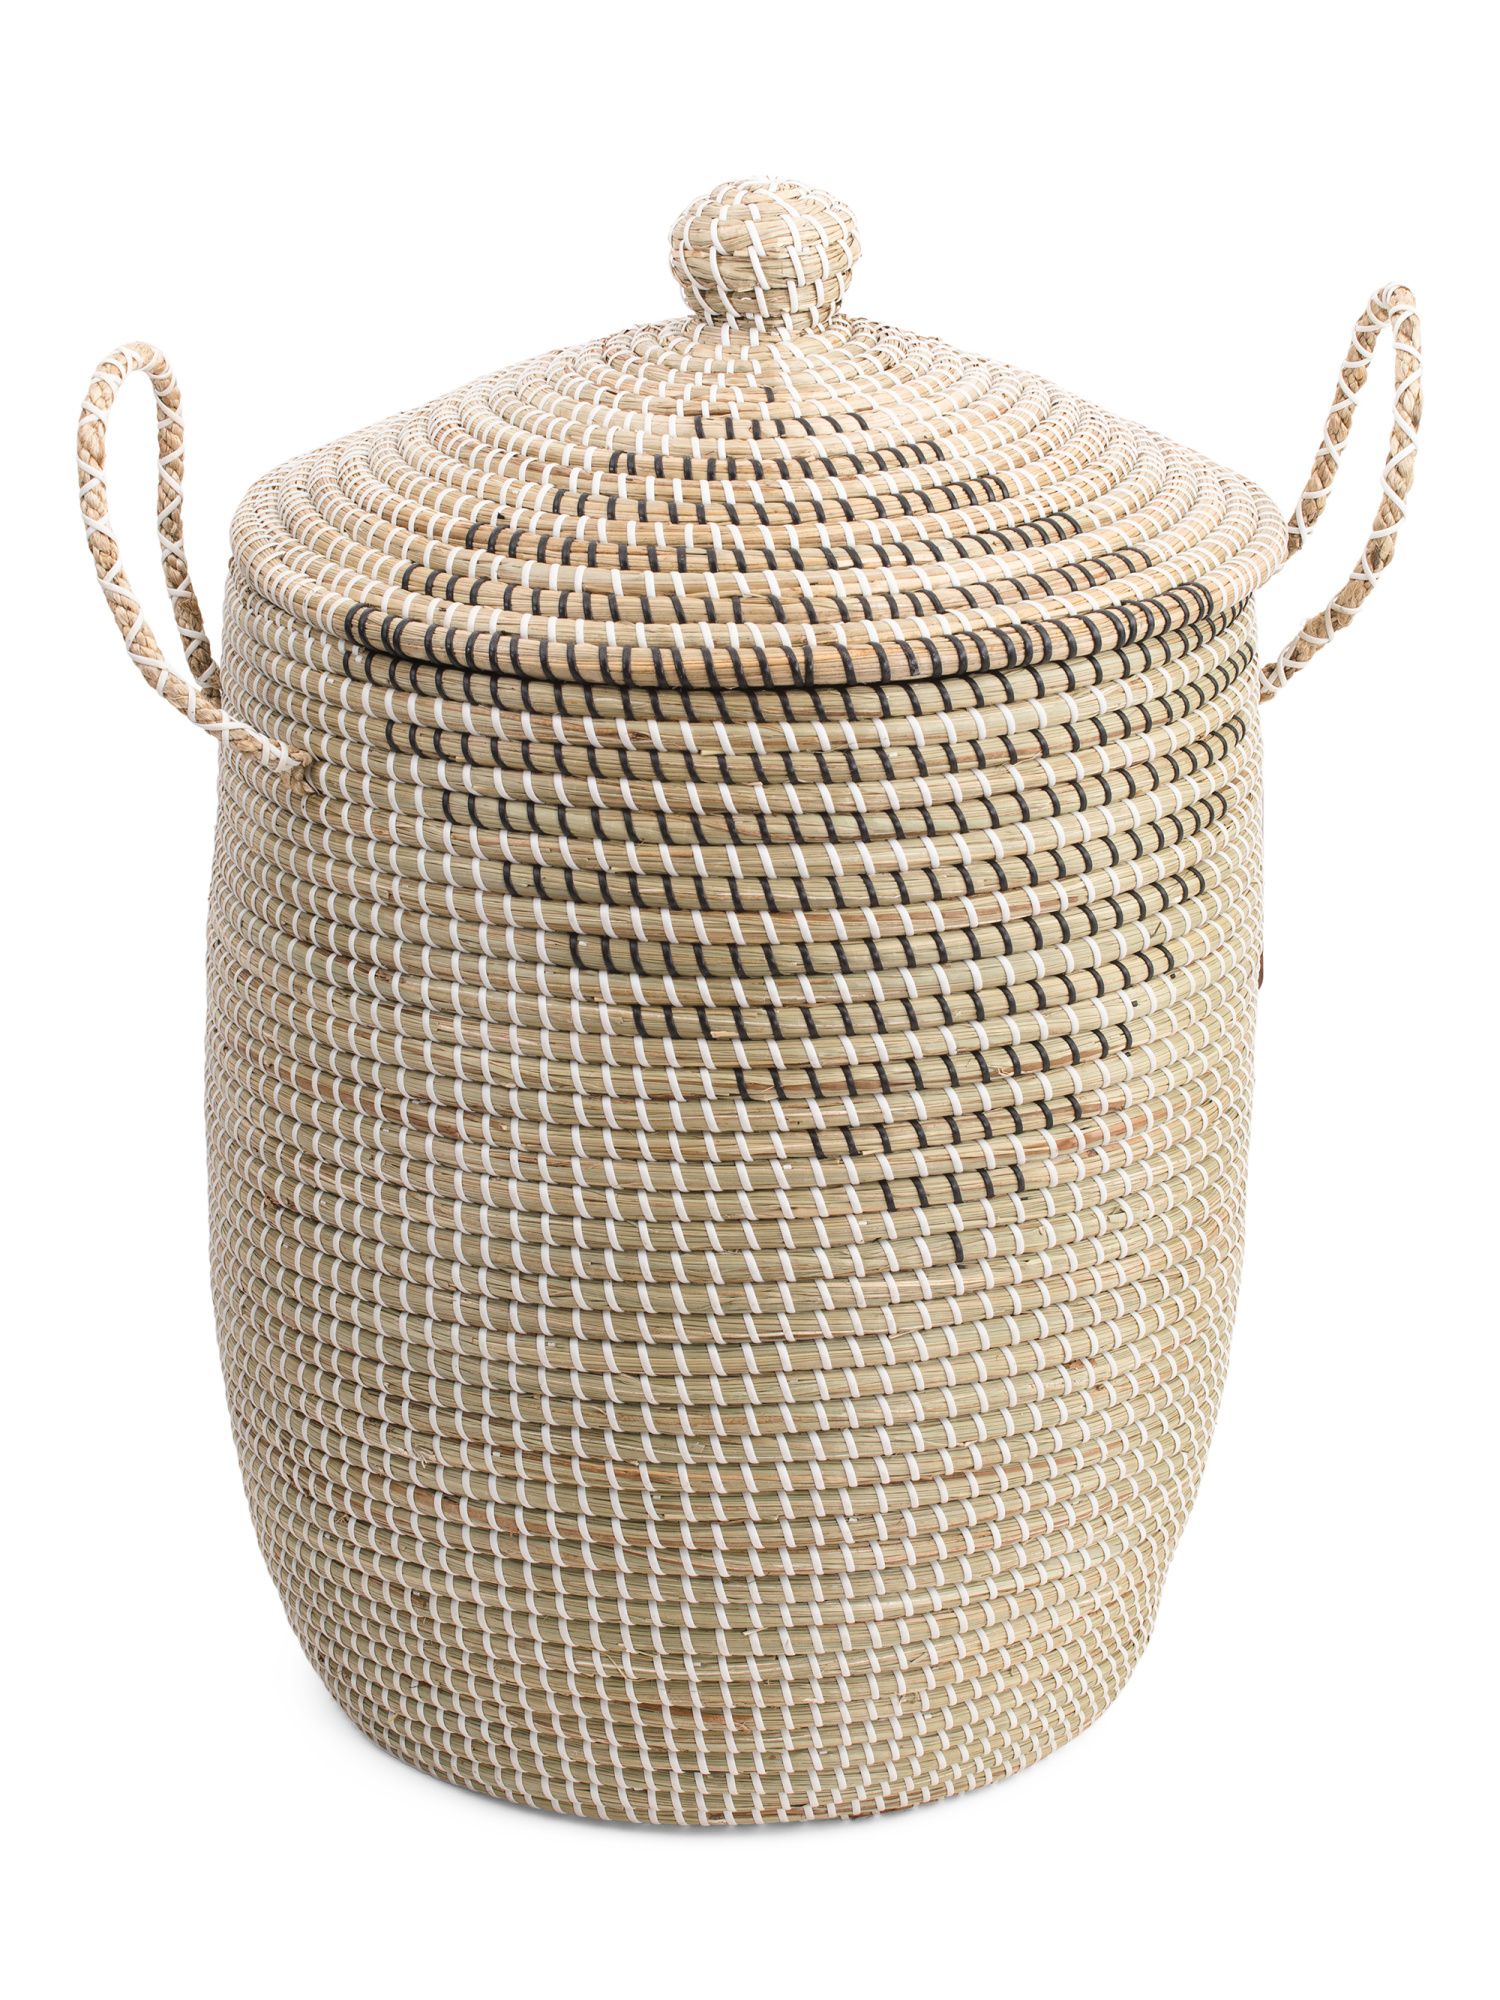 Large Seagrass Hamper With Lid And Rope Handles | TJ Maxx